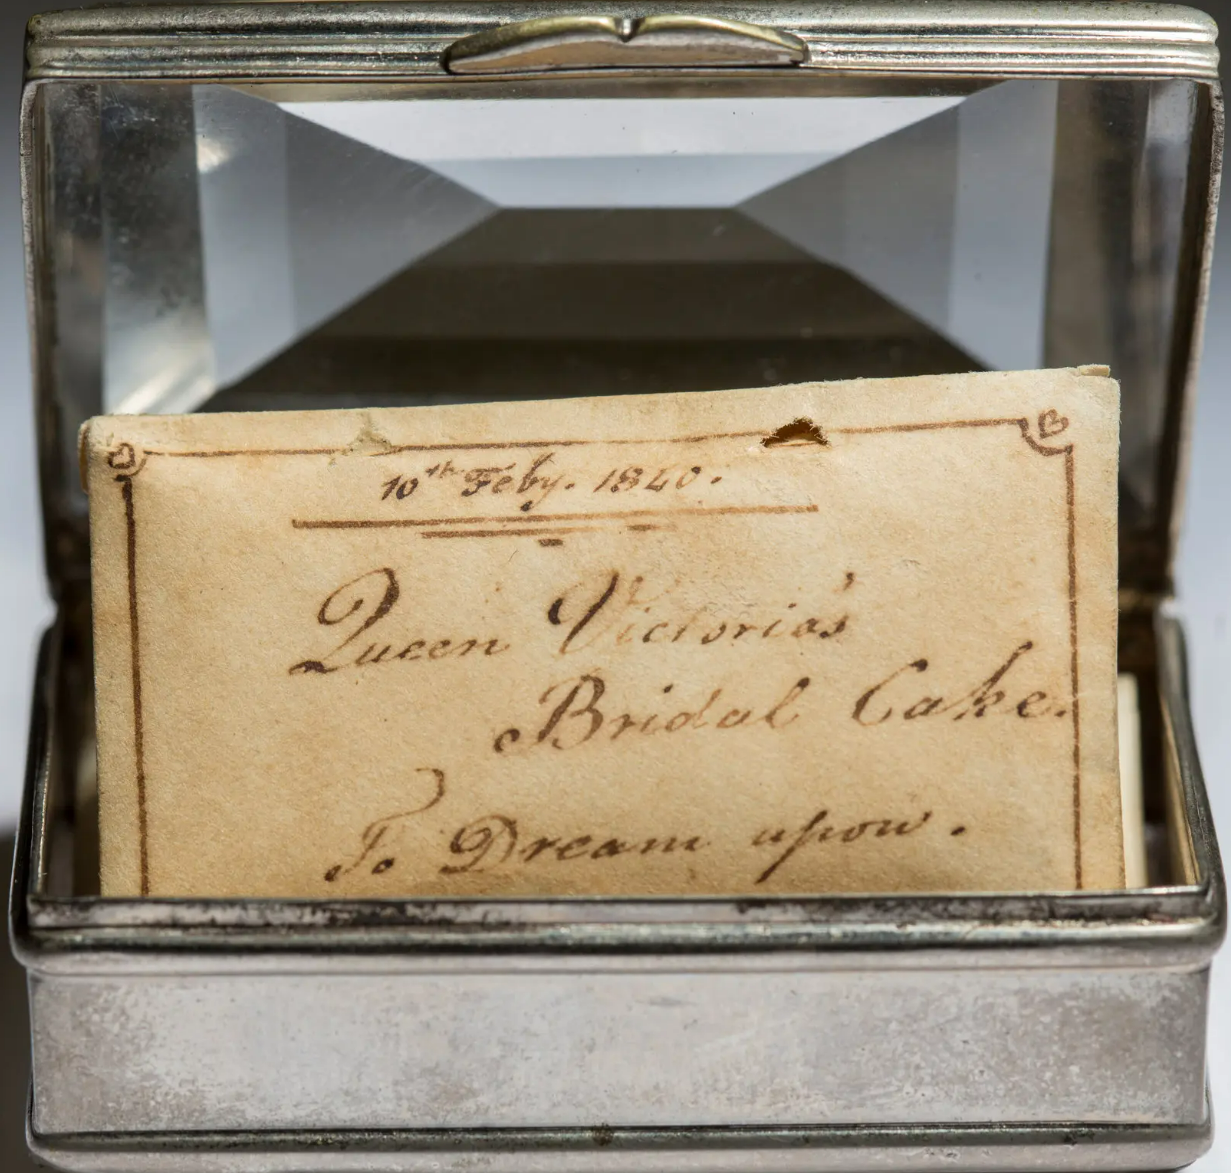 A silvered box with a glass top containing a piece of cake from Queen Victoria’s wedding party.Credit...Fred R. Conrad for The New York Times